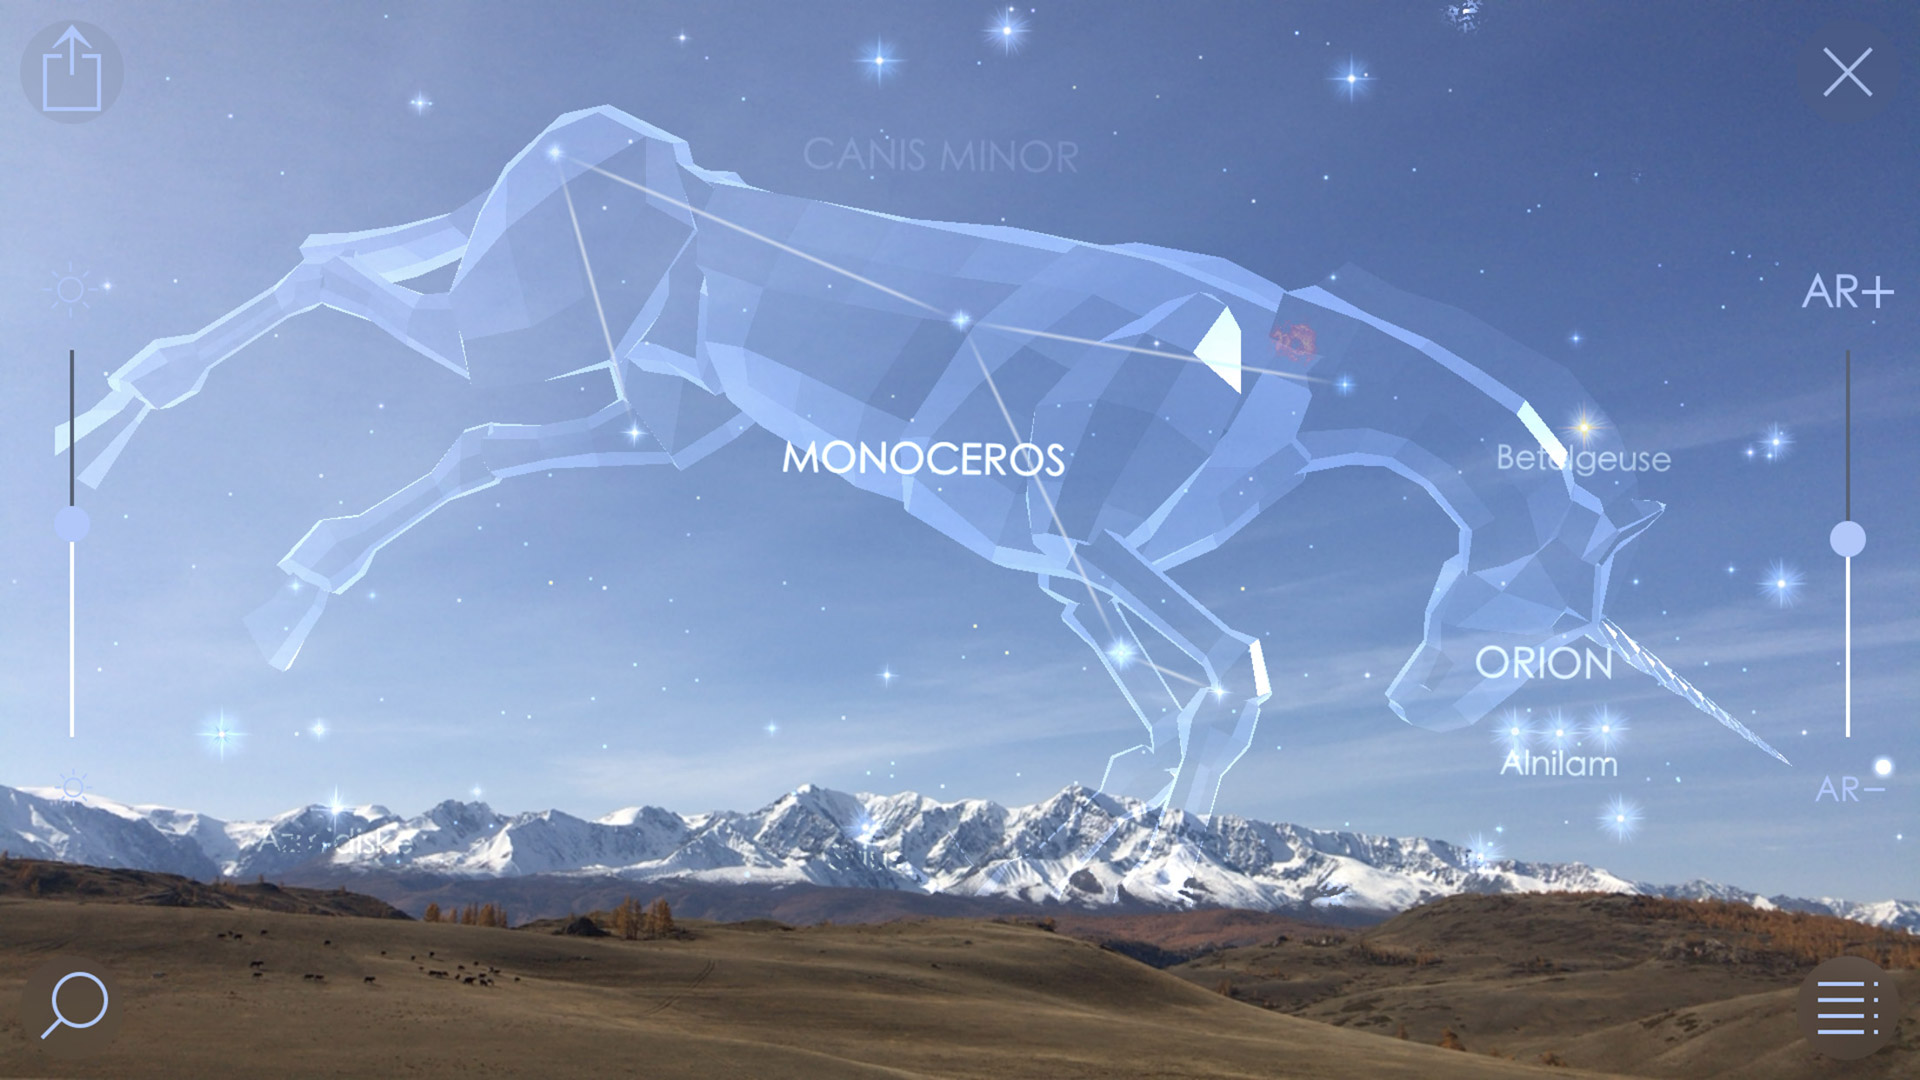 Screenshot from the Star Walk 2 app on iPad showing the constellation monoceros superimposed on an augmented reality background of mountains